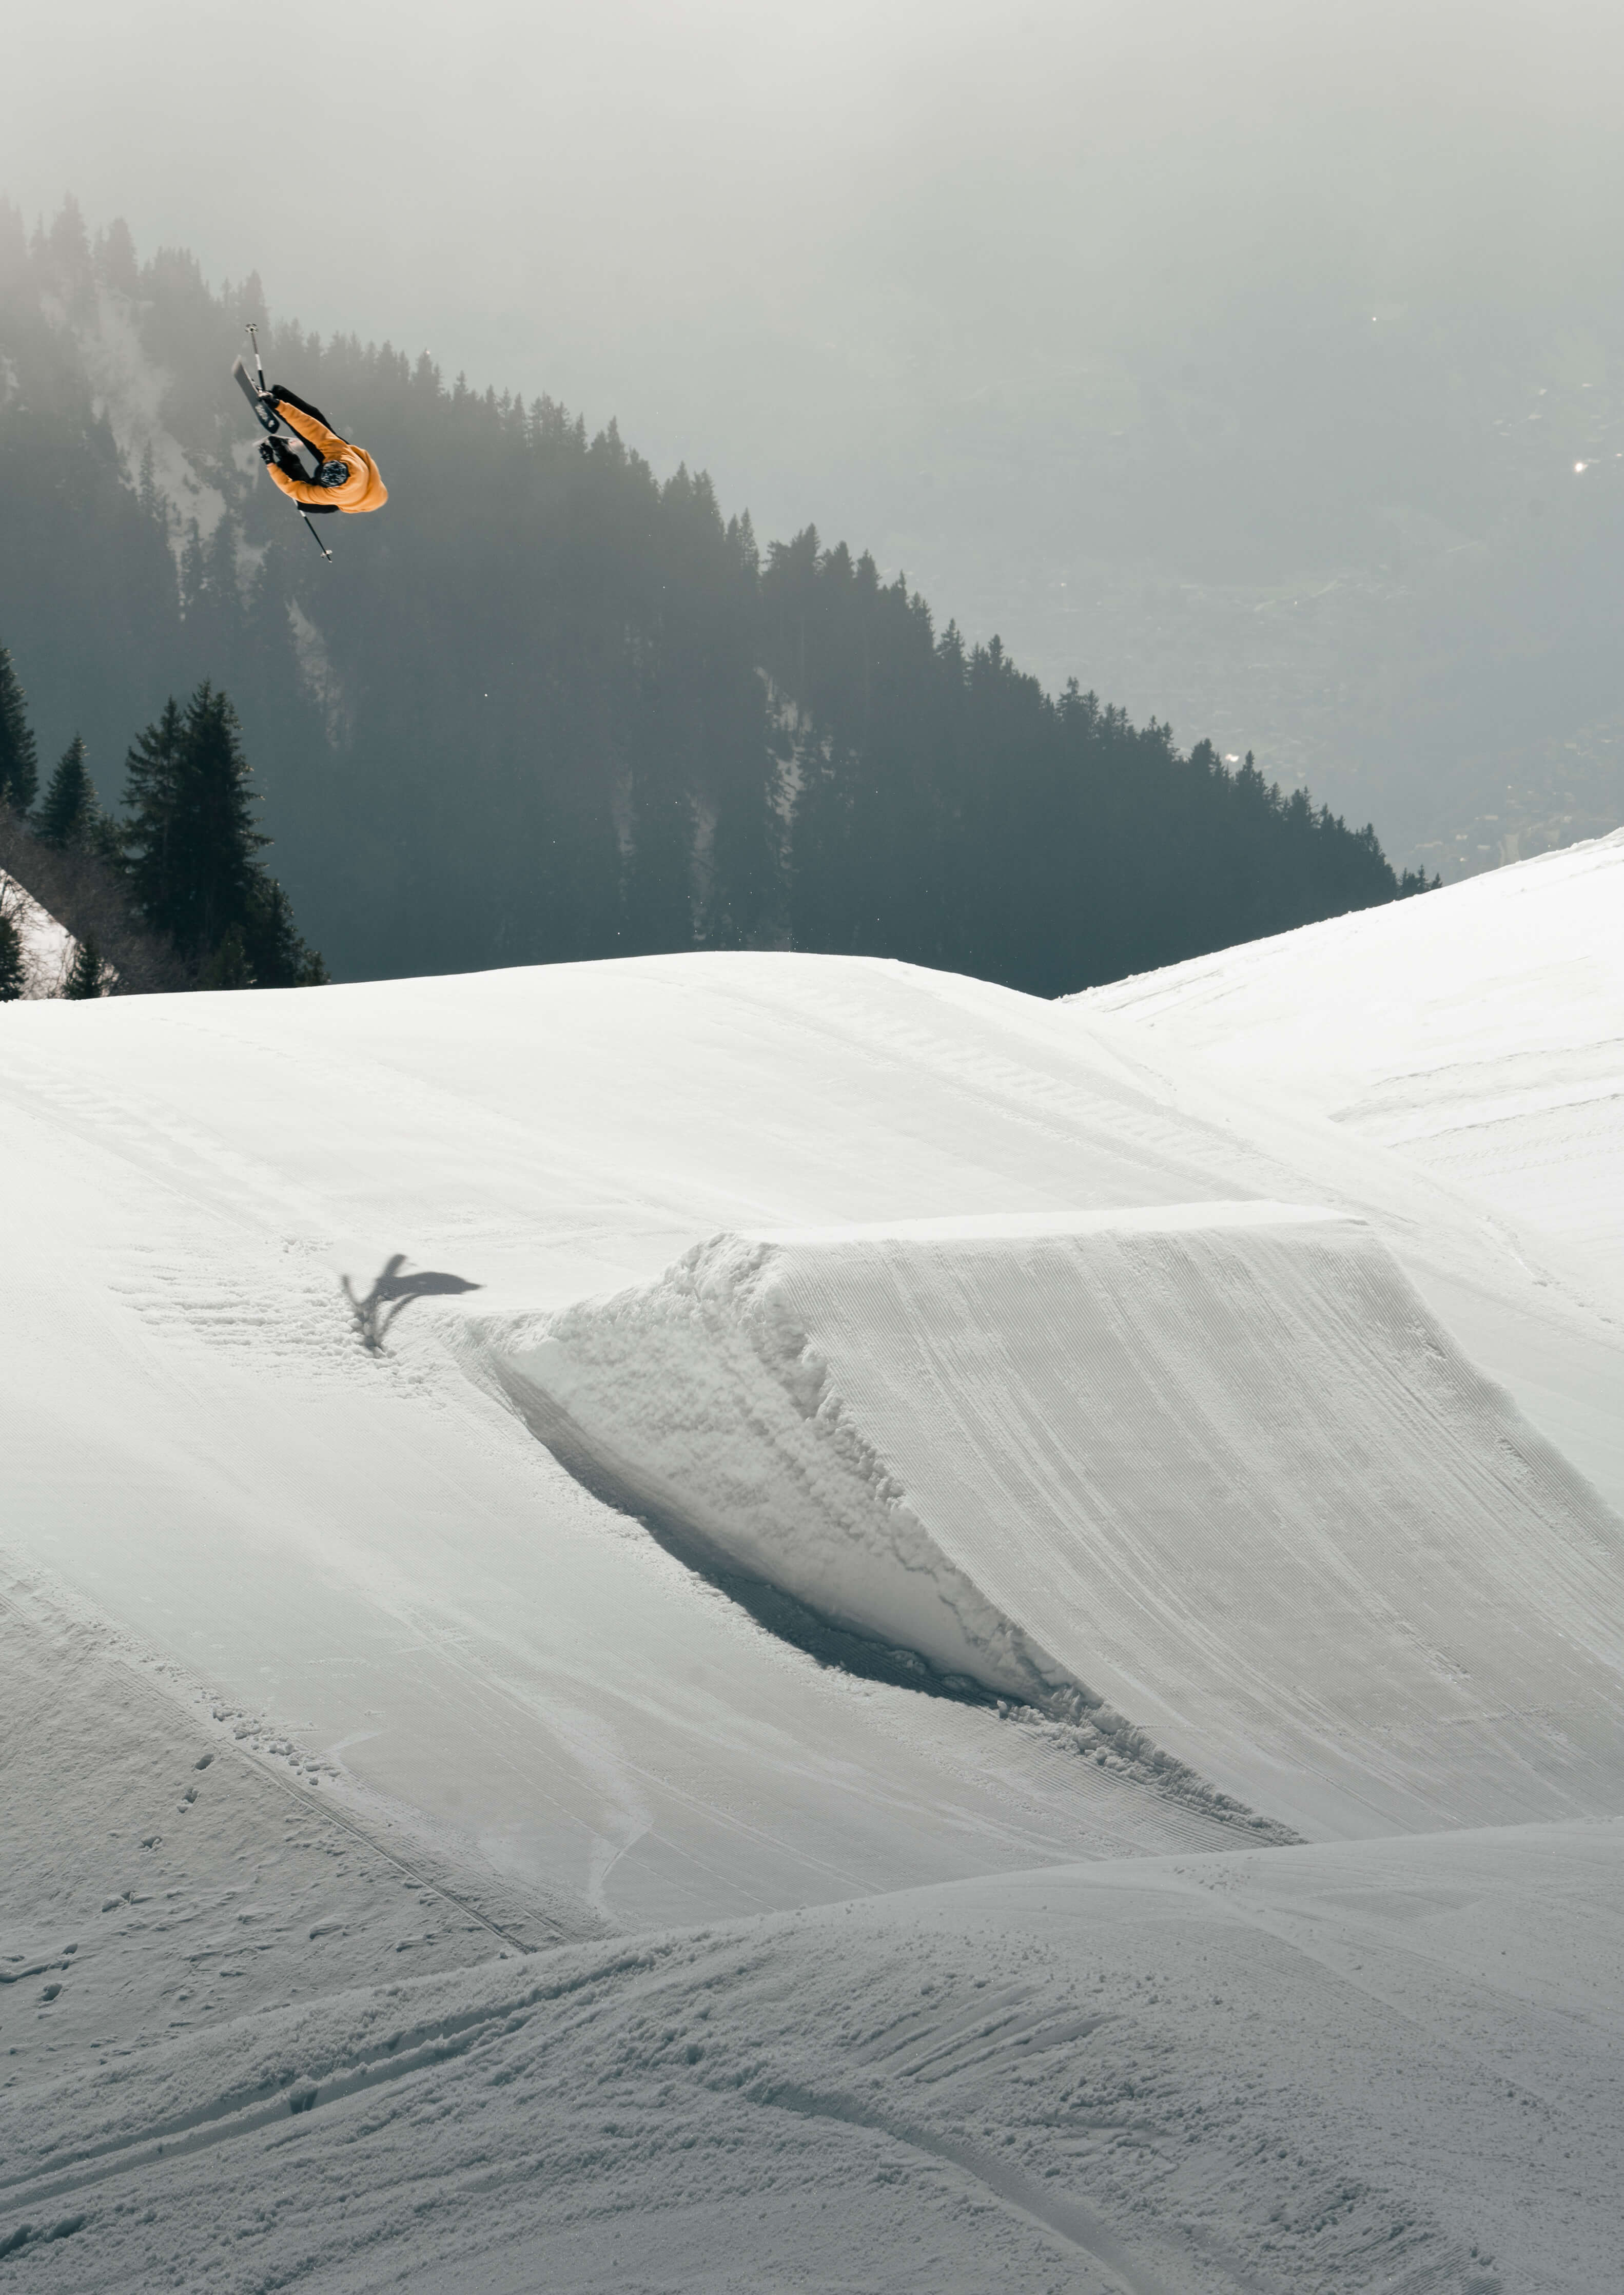 The Movement's rider Aleksi Patja freestyle skiing in Leysin with his Fly 95.